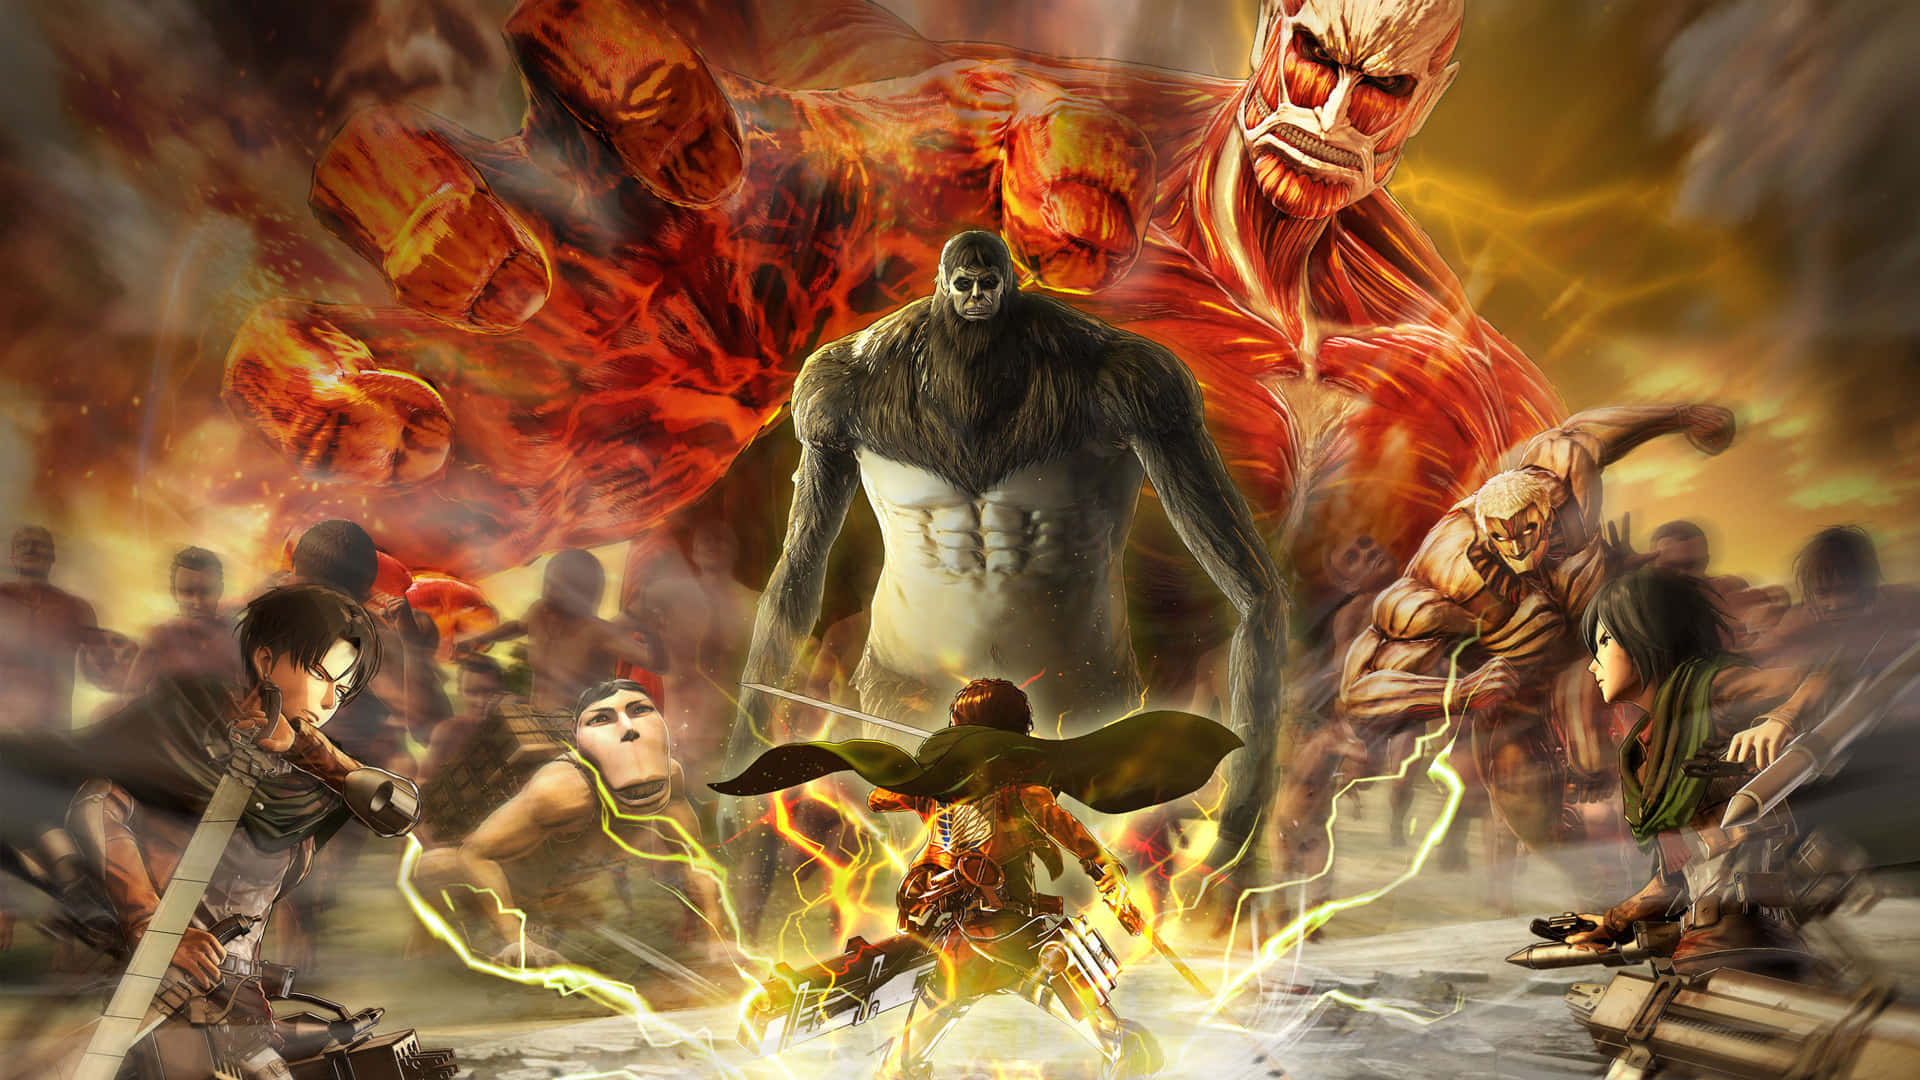 Experience the climactic final battle of AoT2!" Wallpaper